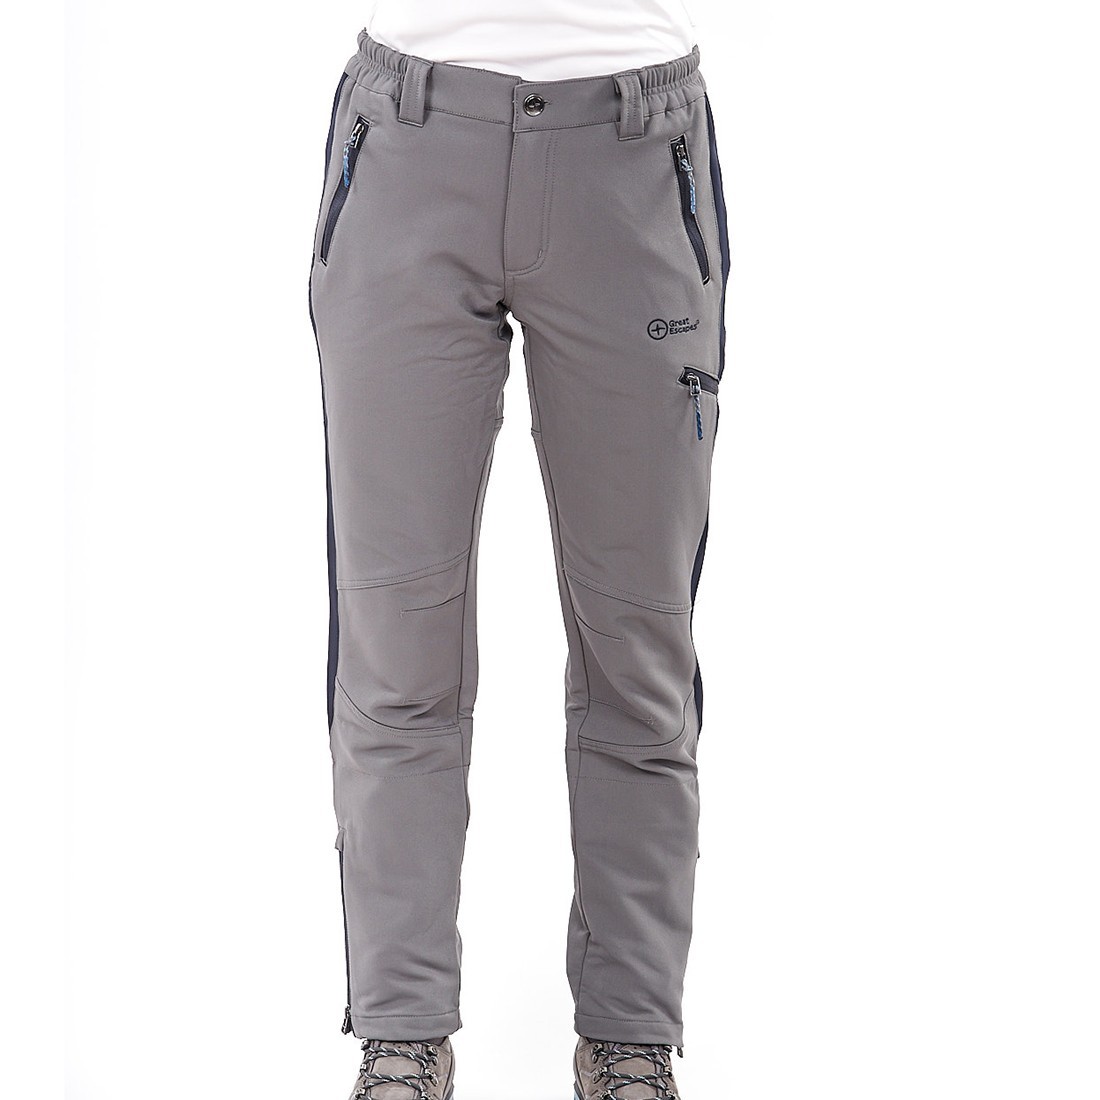 ELBRUS - Technical water-repellent lady pant